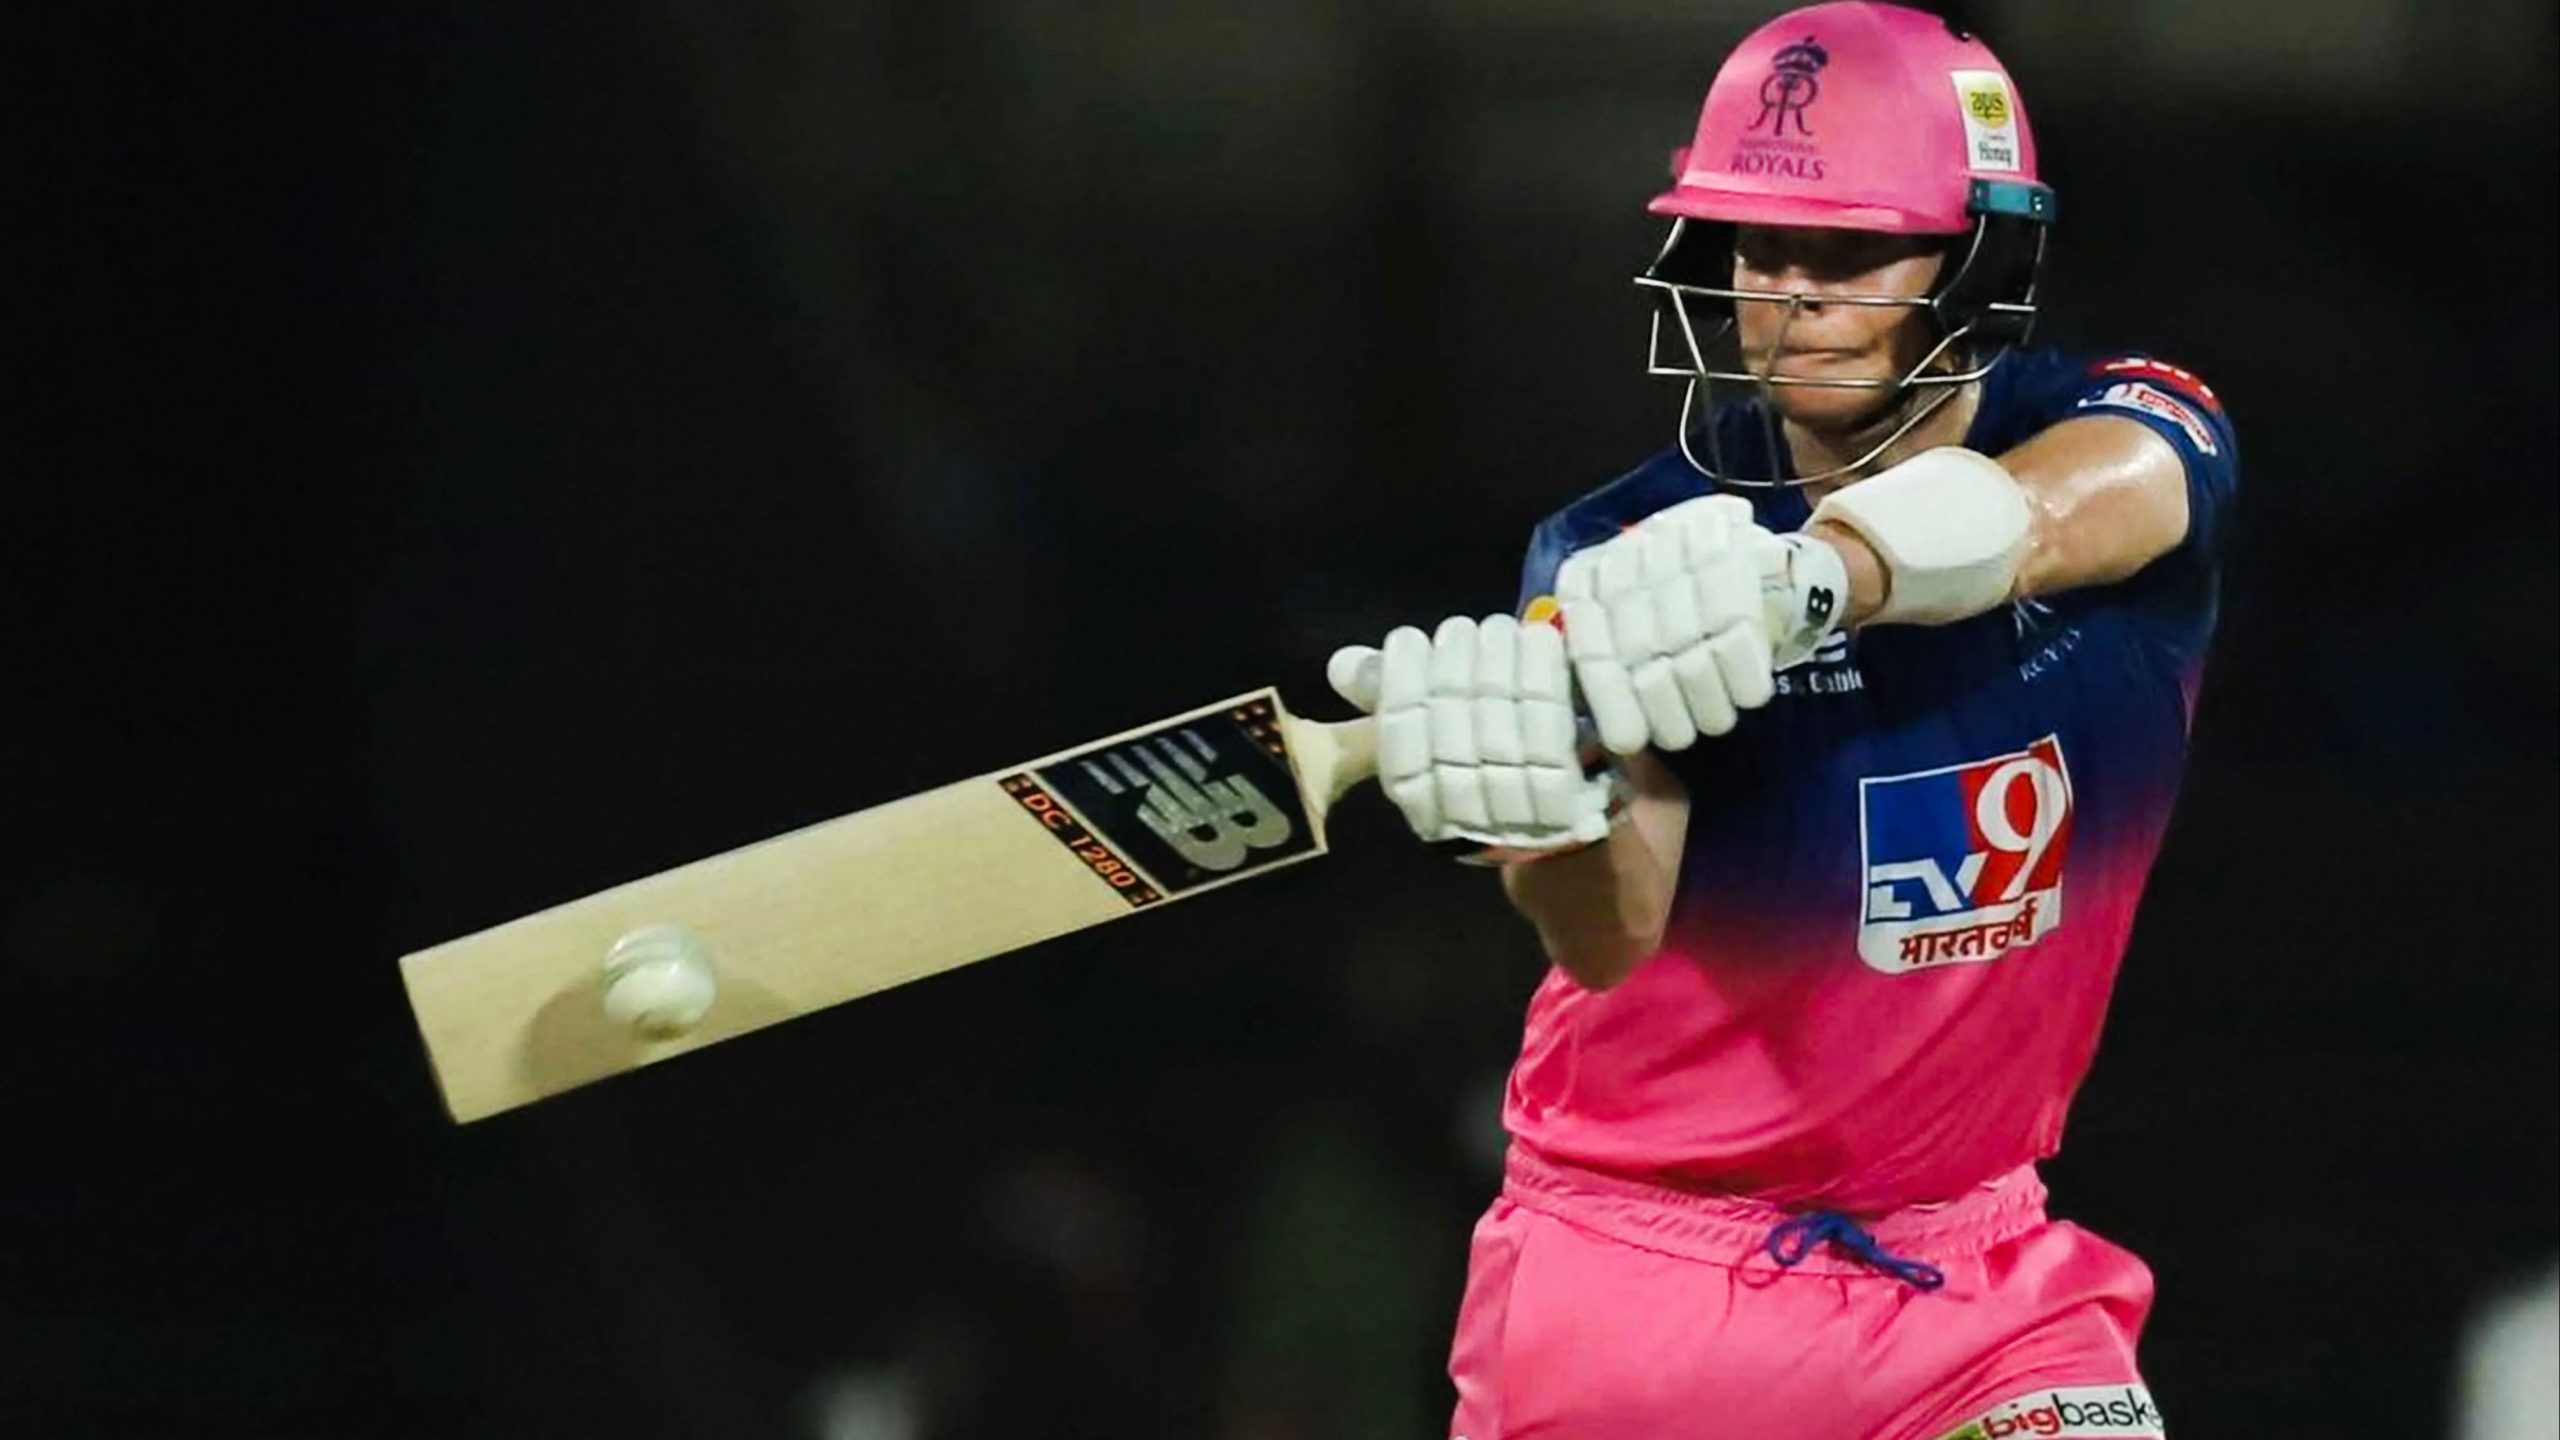 Rajasthan Royals captain Steven Smith fined Rs 12 lakh for slow over-rate against Mumbai Indians